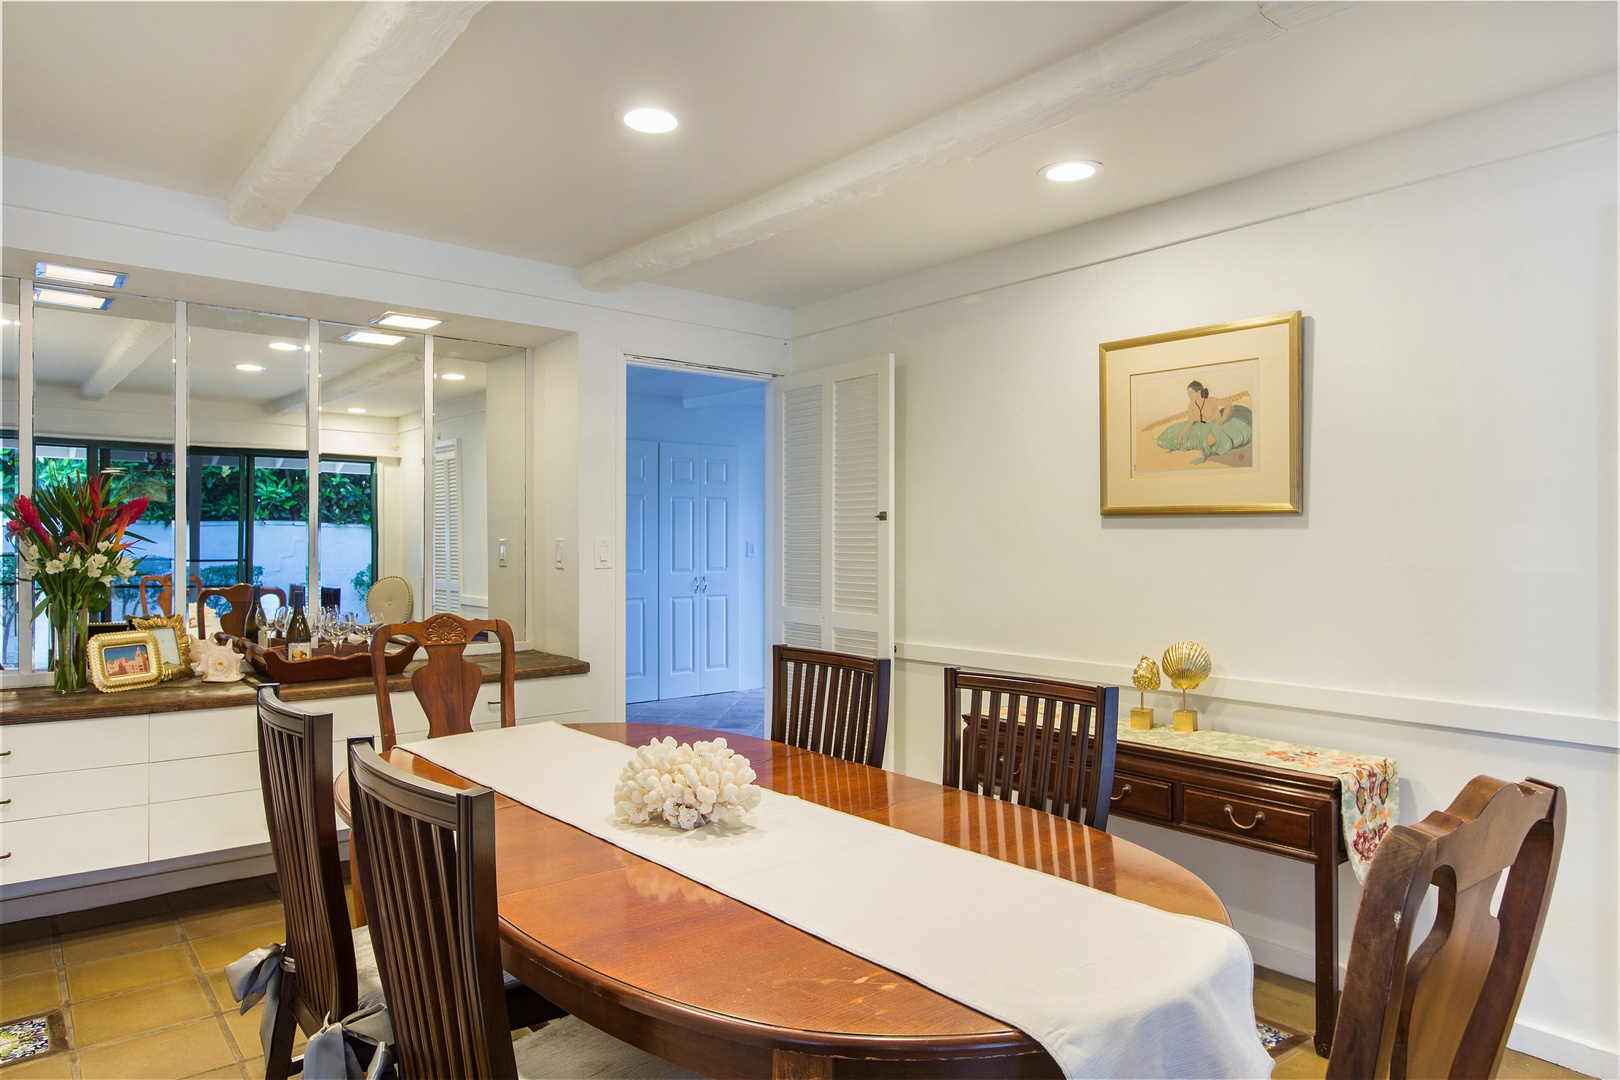 Honolulu Vacation Rentals, Hale Kai - Enjoy dinners in the semi- formal dining room, next to the kitchen and sitting room.